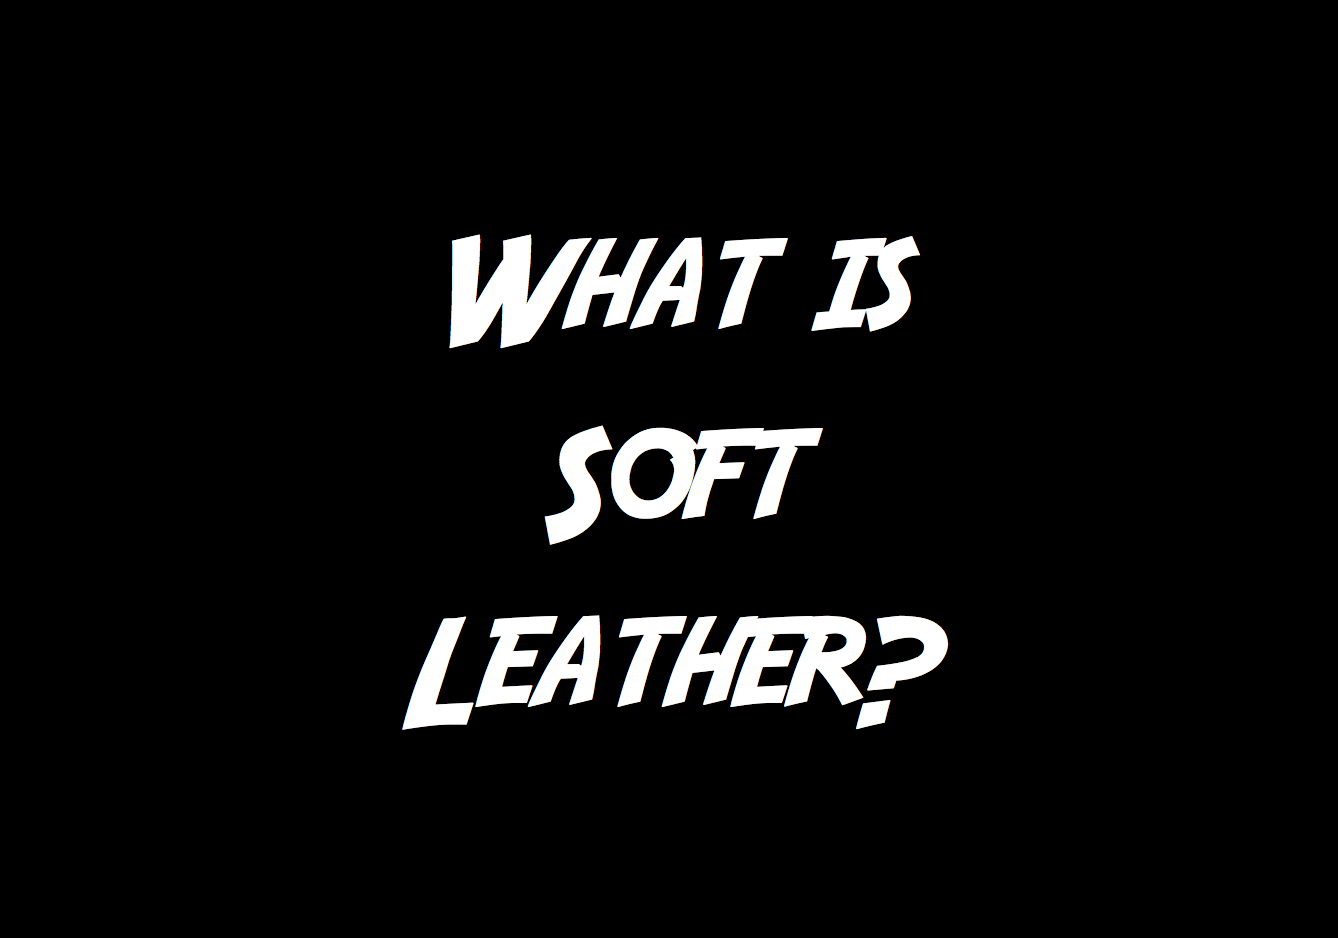 leather so soft mp3 download